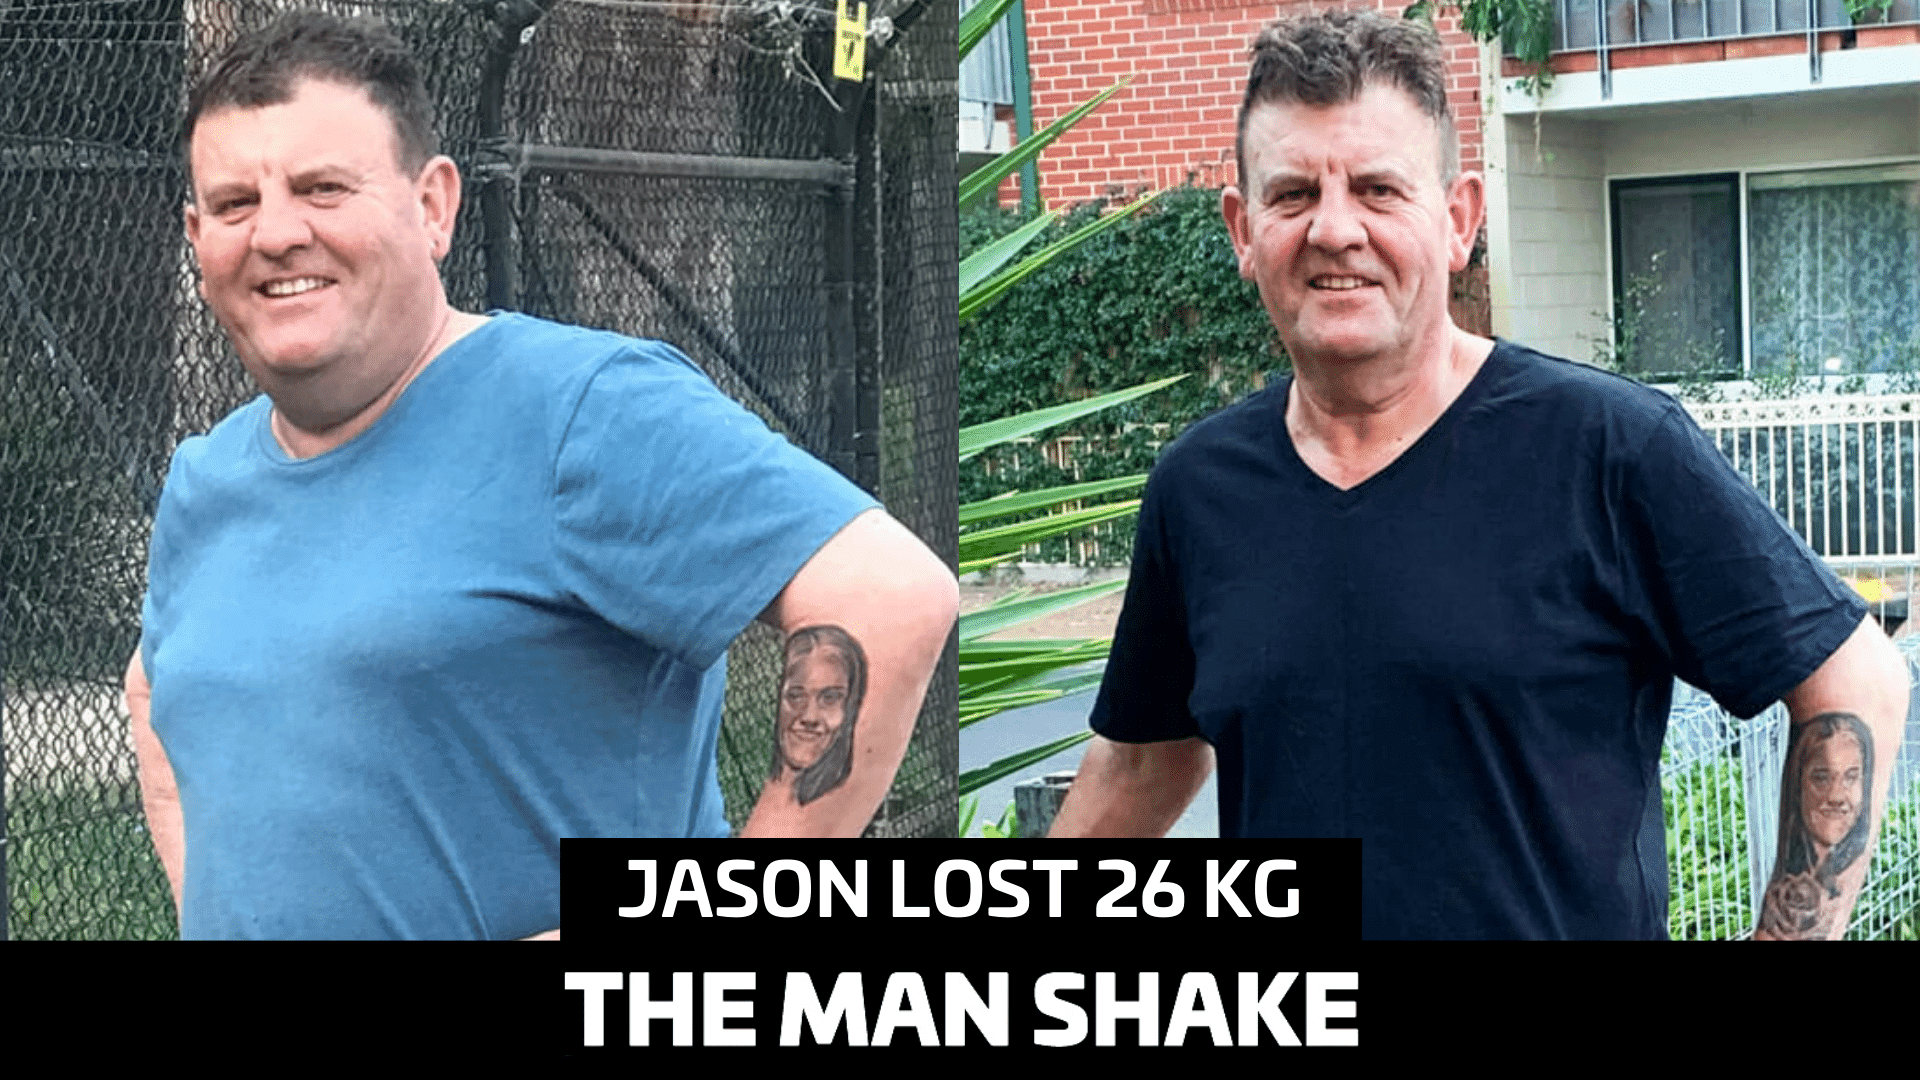 Jason got himself out of a rut and lost 26kg